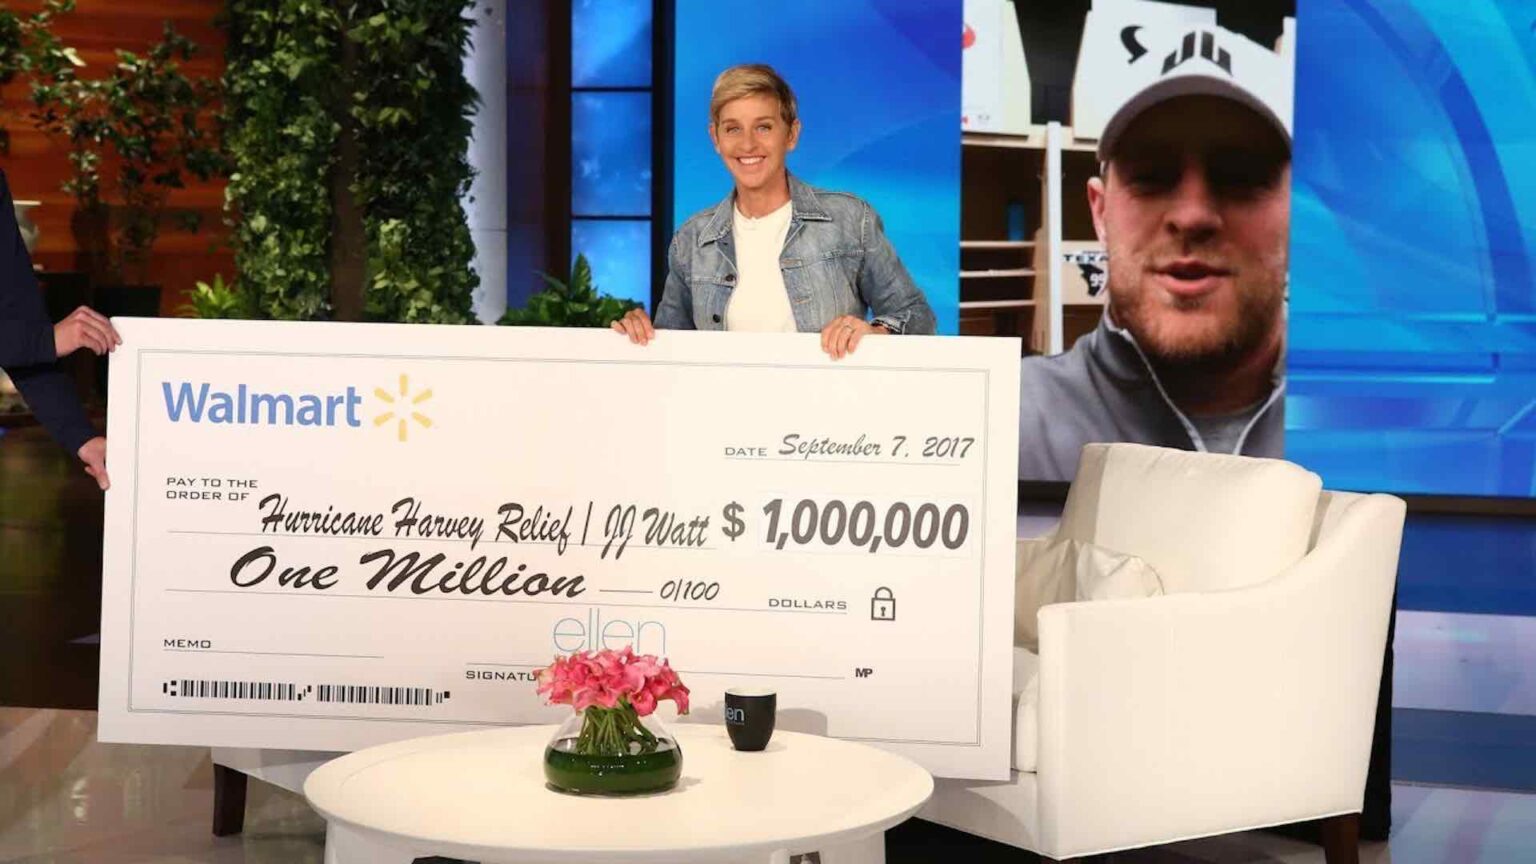 Ellen DeGeneres has all kinds of inspiring and heartwarming moments on 'The Ellen DeGeneres Show'. Was it for publicity? Here's what we know.